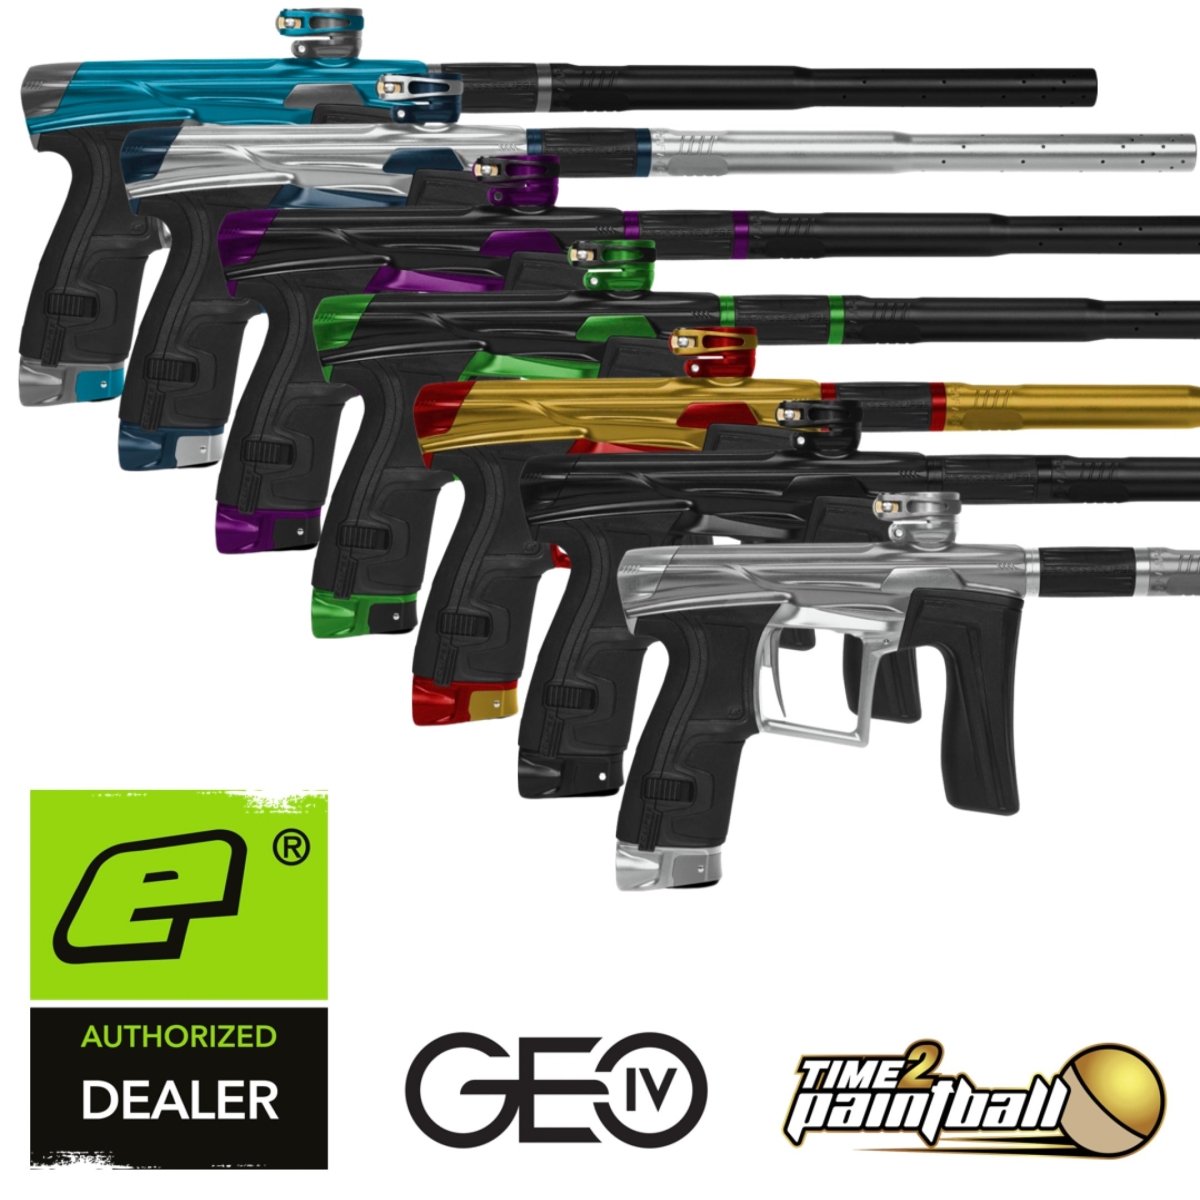 Planet Eclipse GEO4 - Time 2 Paintball